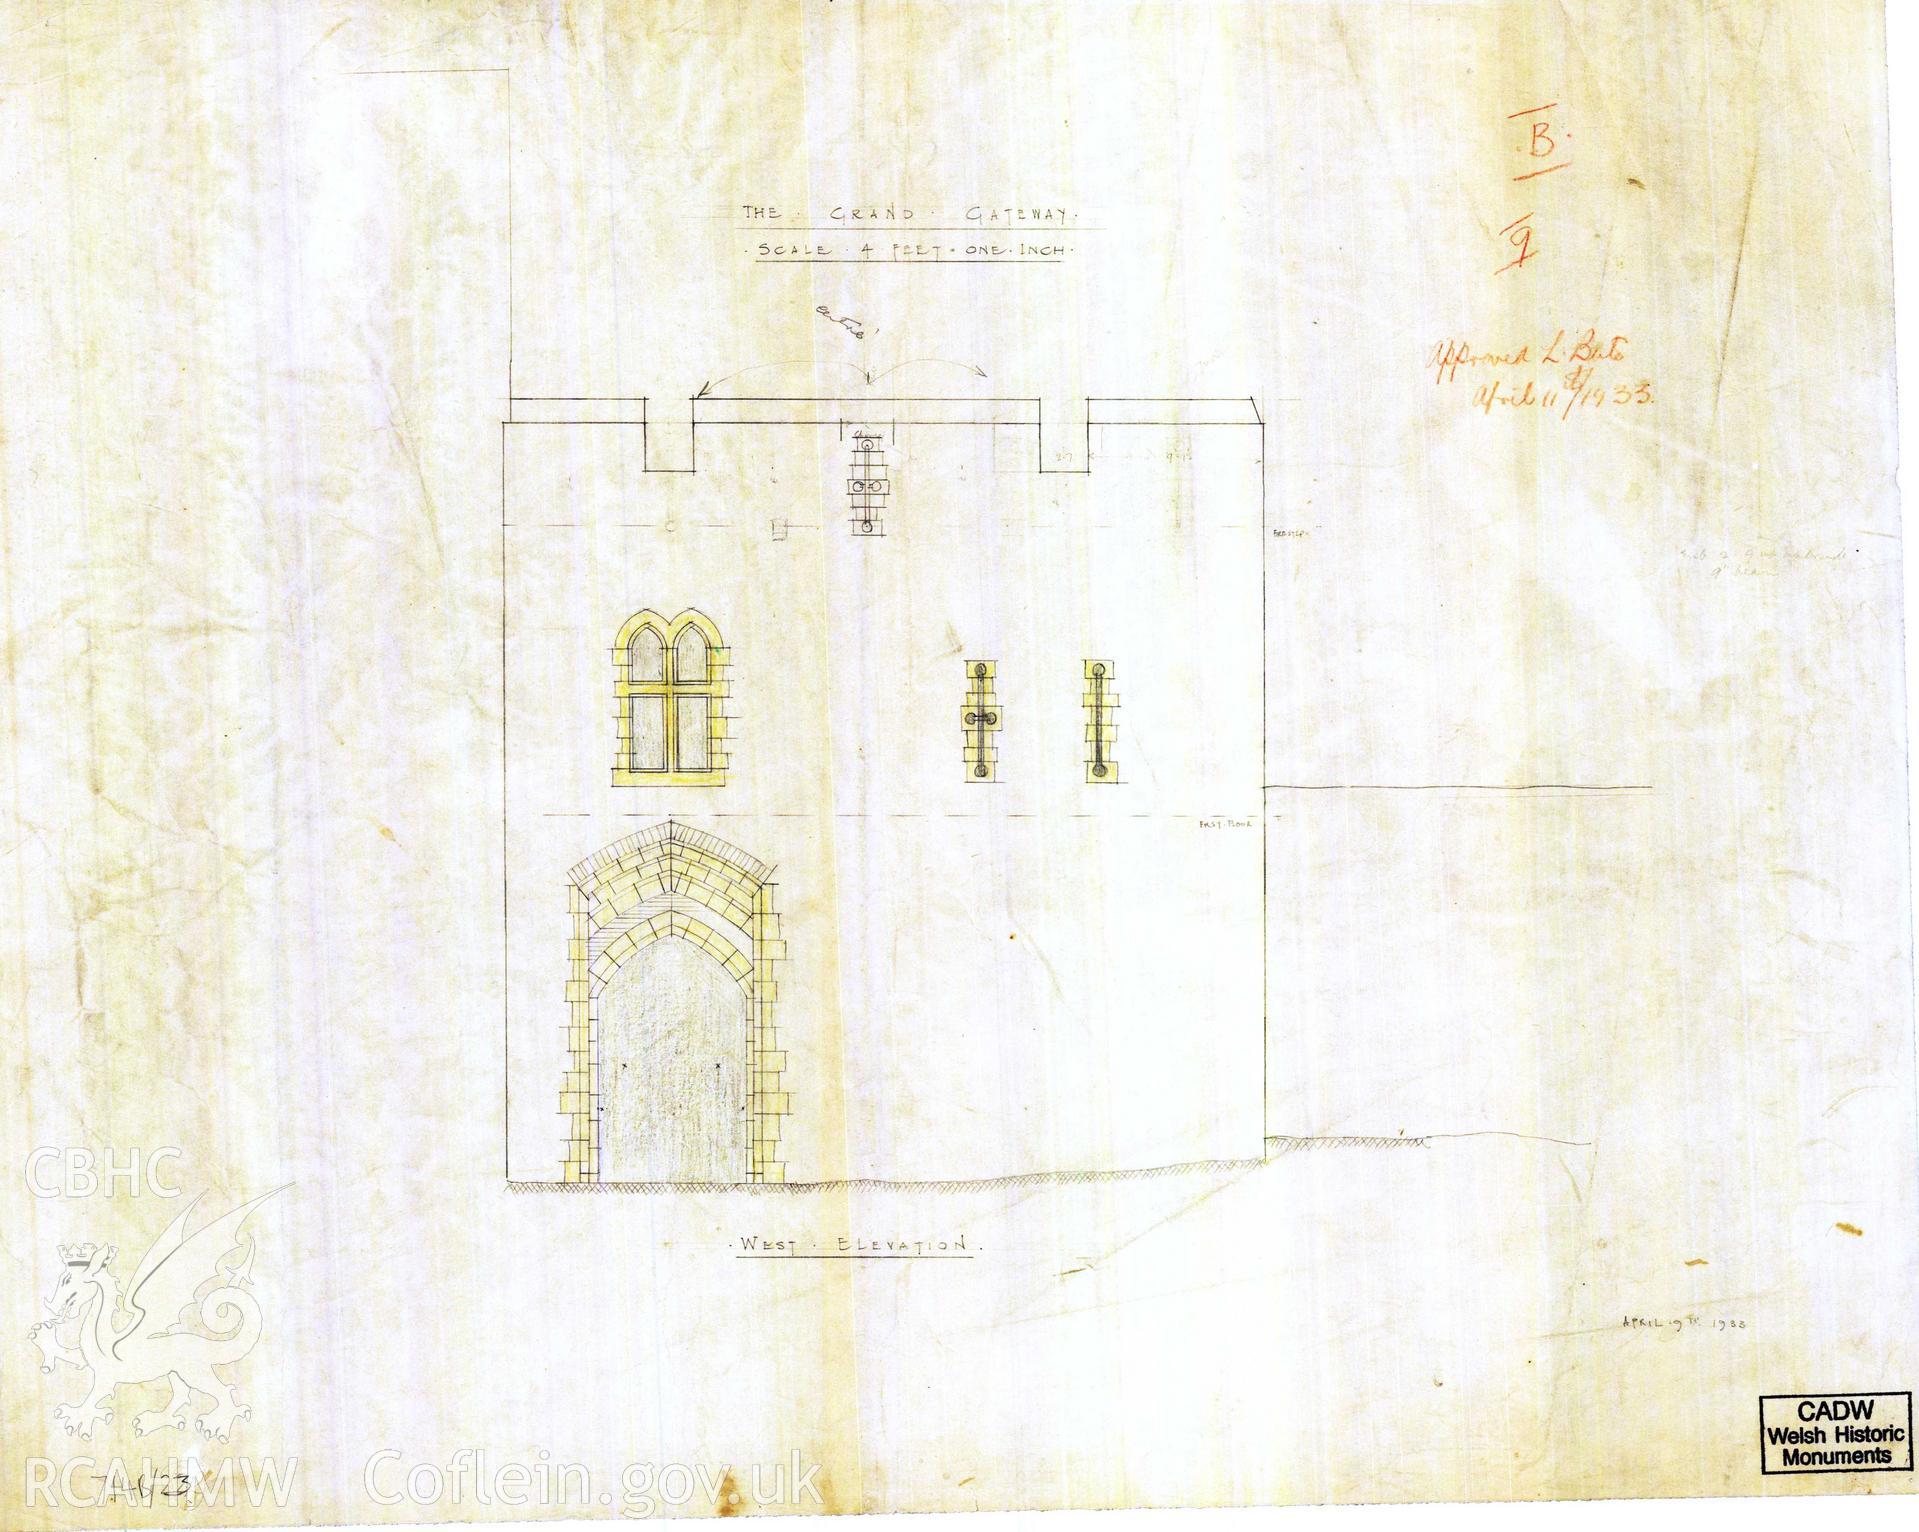 Cadw guardianship monument drawing of Caerphilly Castle. Outer E gate, W (int) elev. Cadw ref. no: 714B/23. Scale 1:48.